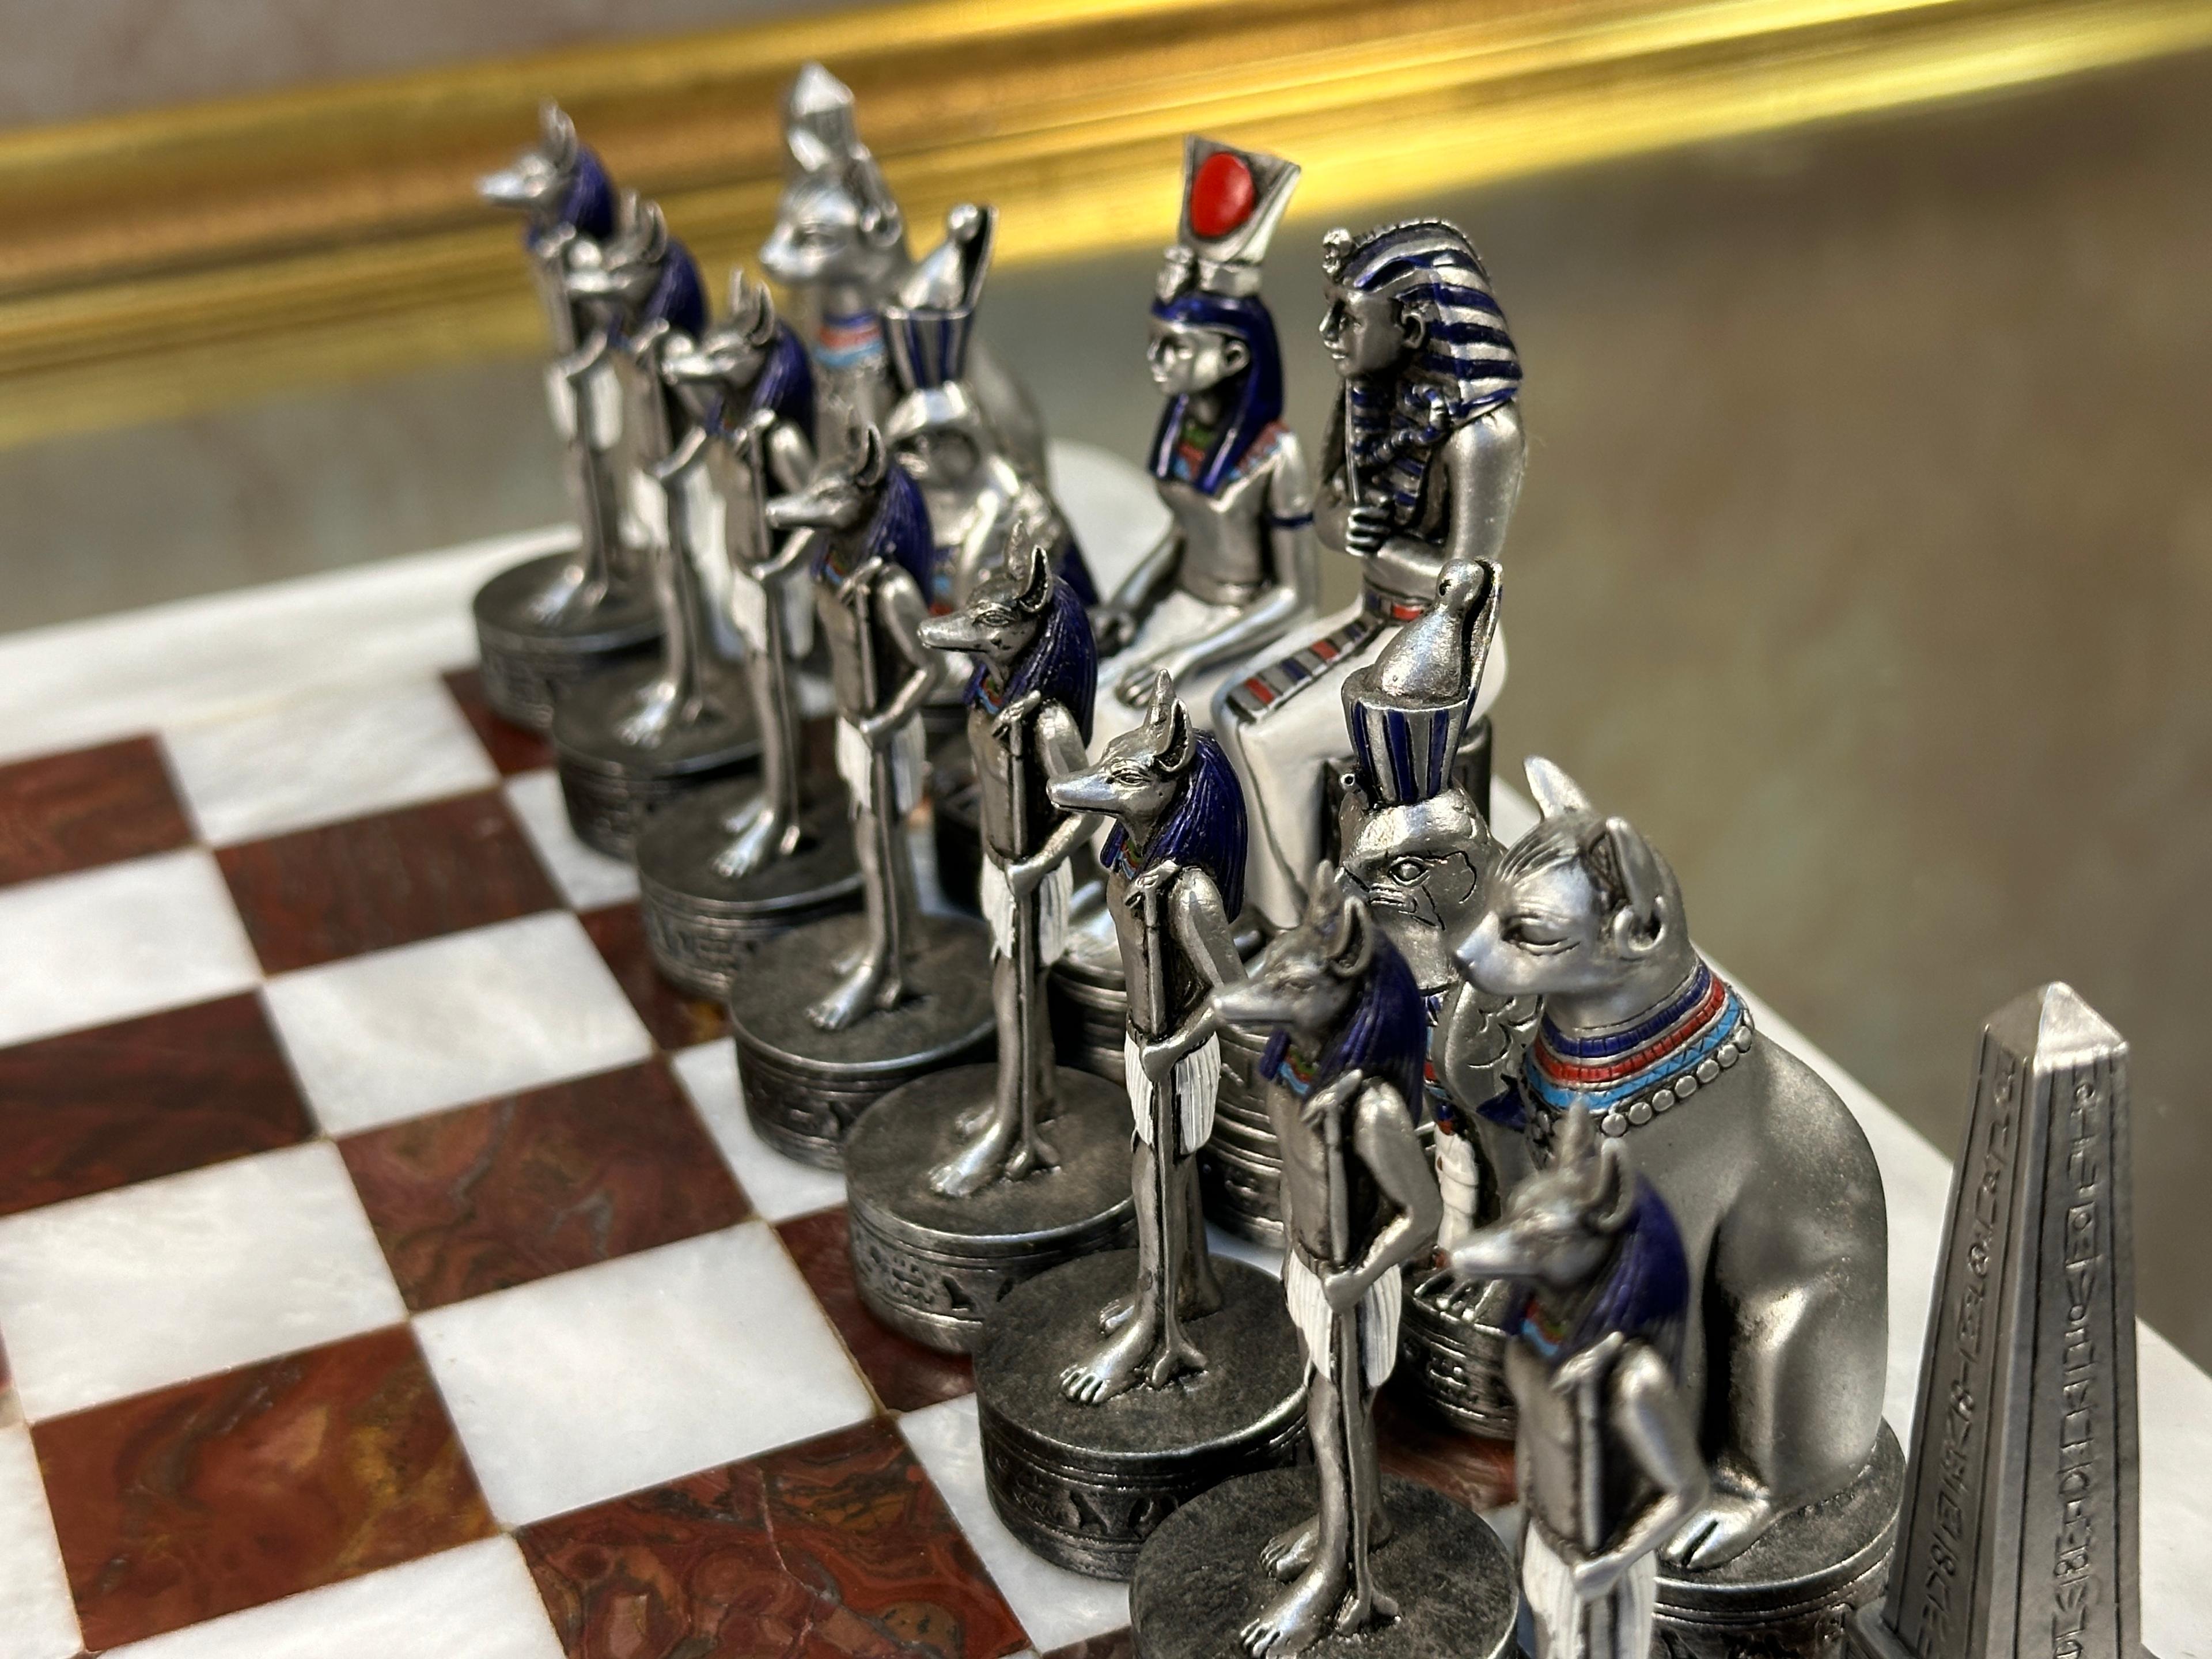 Egyptian Chess Set With Marble Chess Board